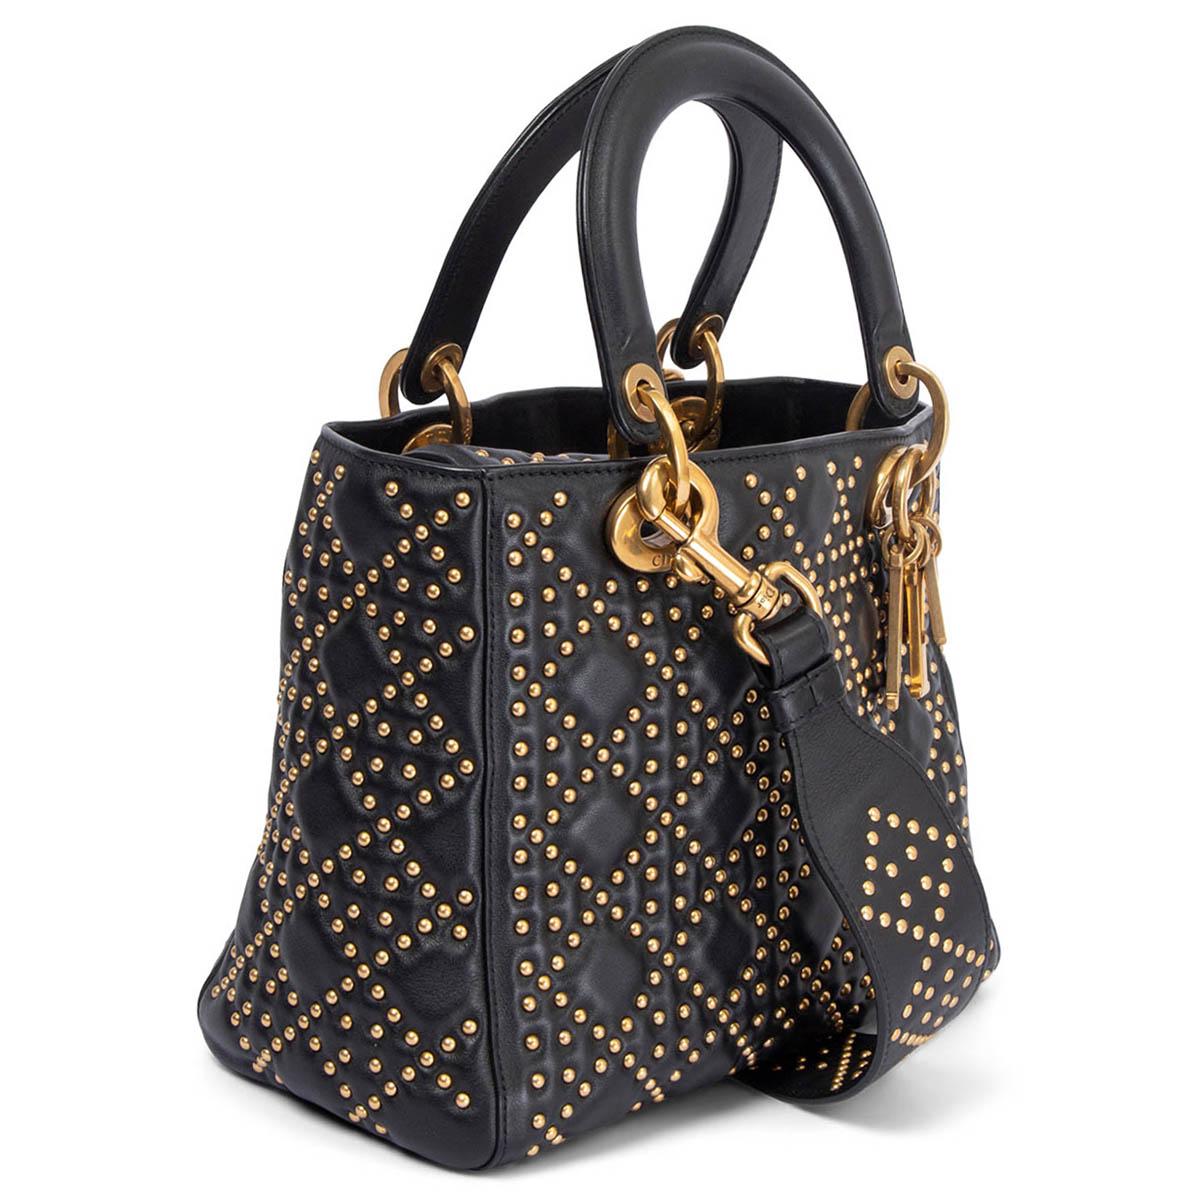 100% authentic Christian Dior Supple Lady Dior Medium bag in black studded Cannage mortif calfskin featuring aged gold-tone metal. Opens with a inner flap to a suede lined interior with one zipper pocket against the back and one open pocket against